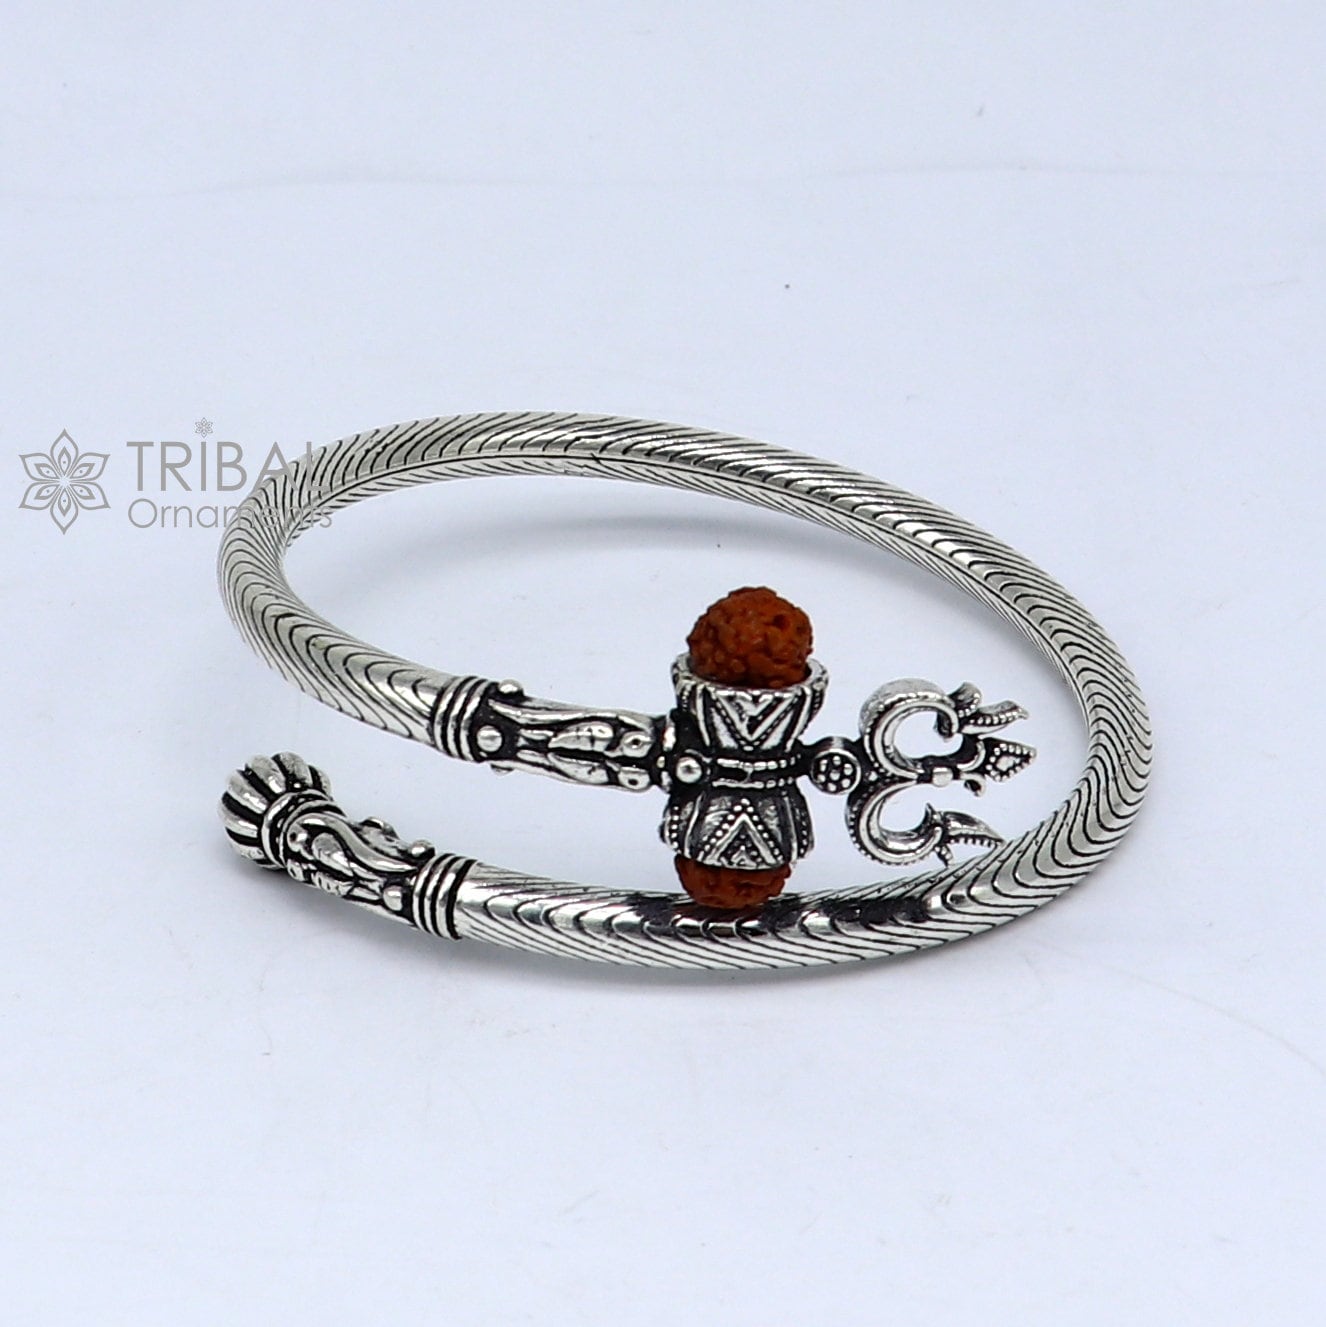 Buy 925 Sterling Silver Gorgeous Lord Shiva Trident Trishool Kada Bangle  Bracelet With Fabulous Natural Rudraksha Antique Jewelry Nsk771 Online in  India - Etsy